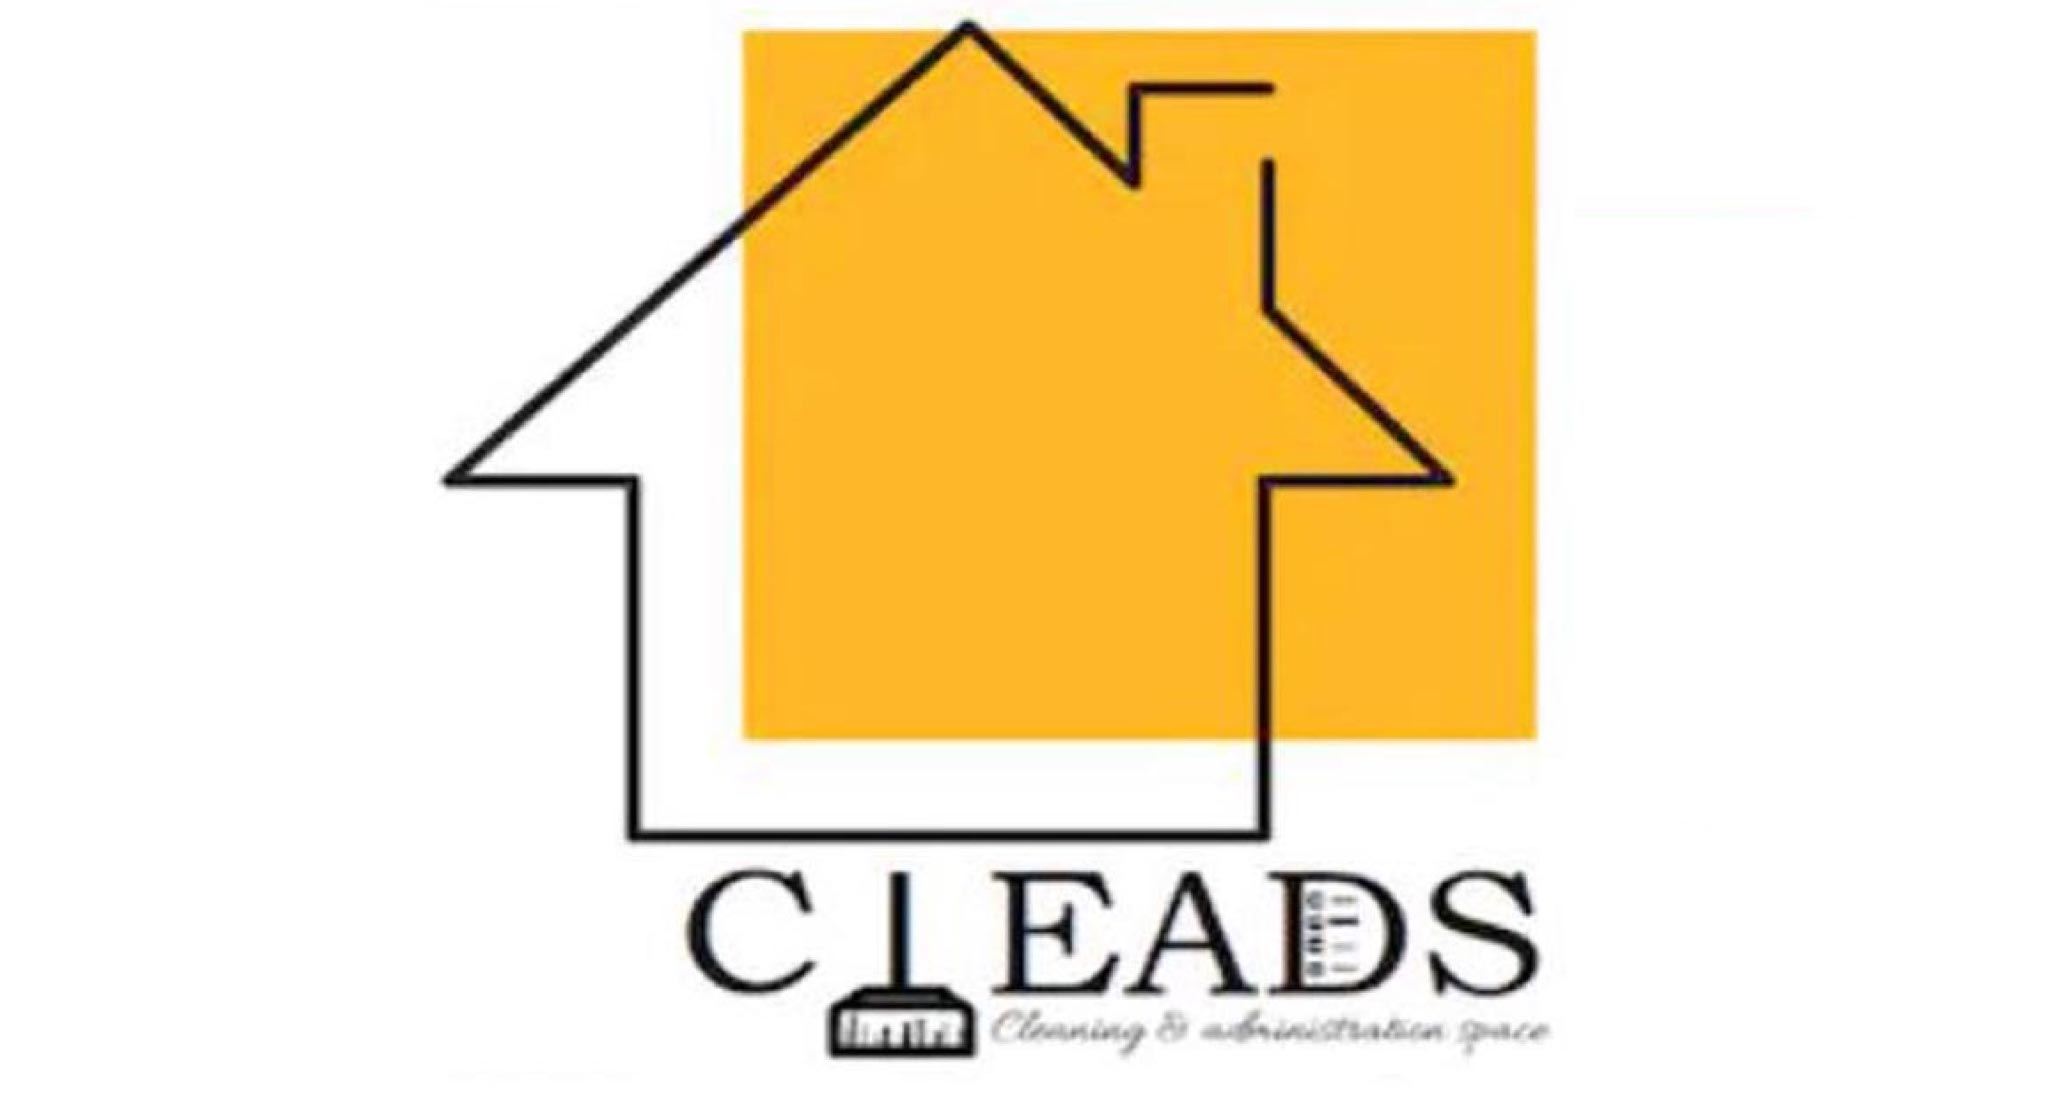 Cleads logo